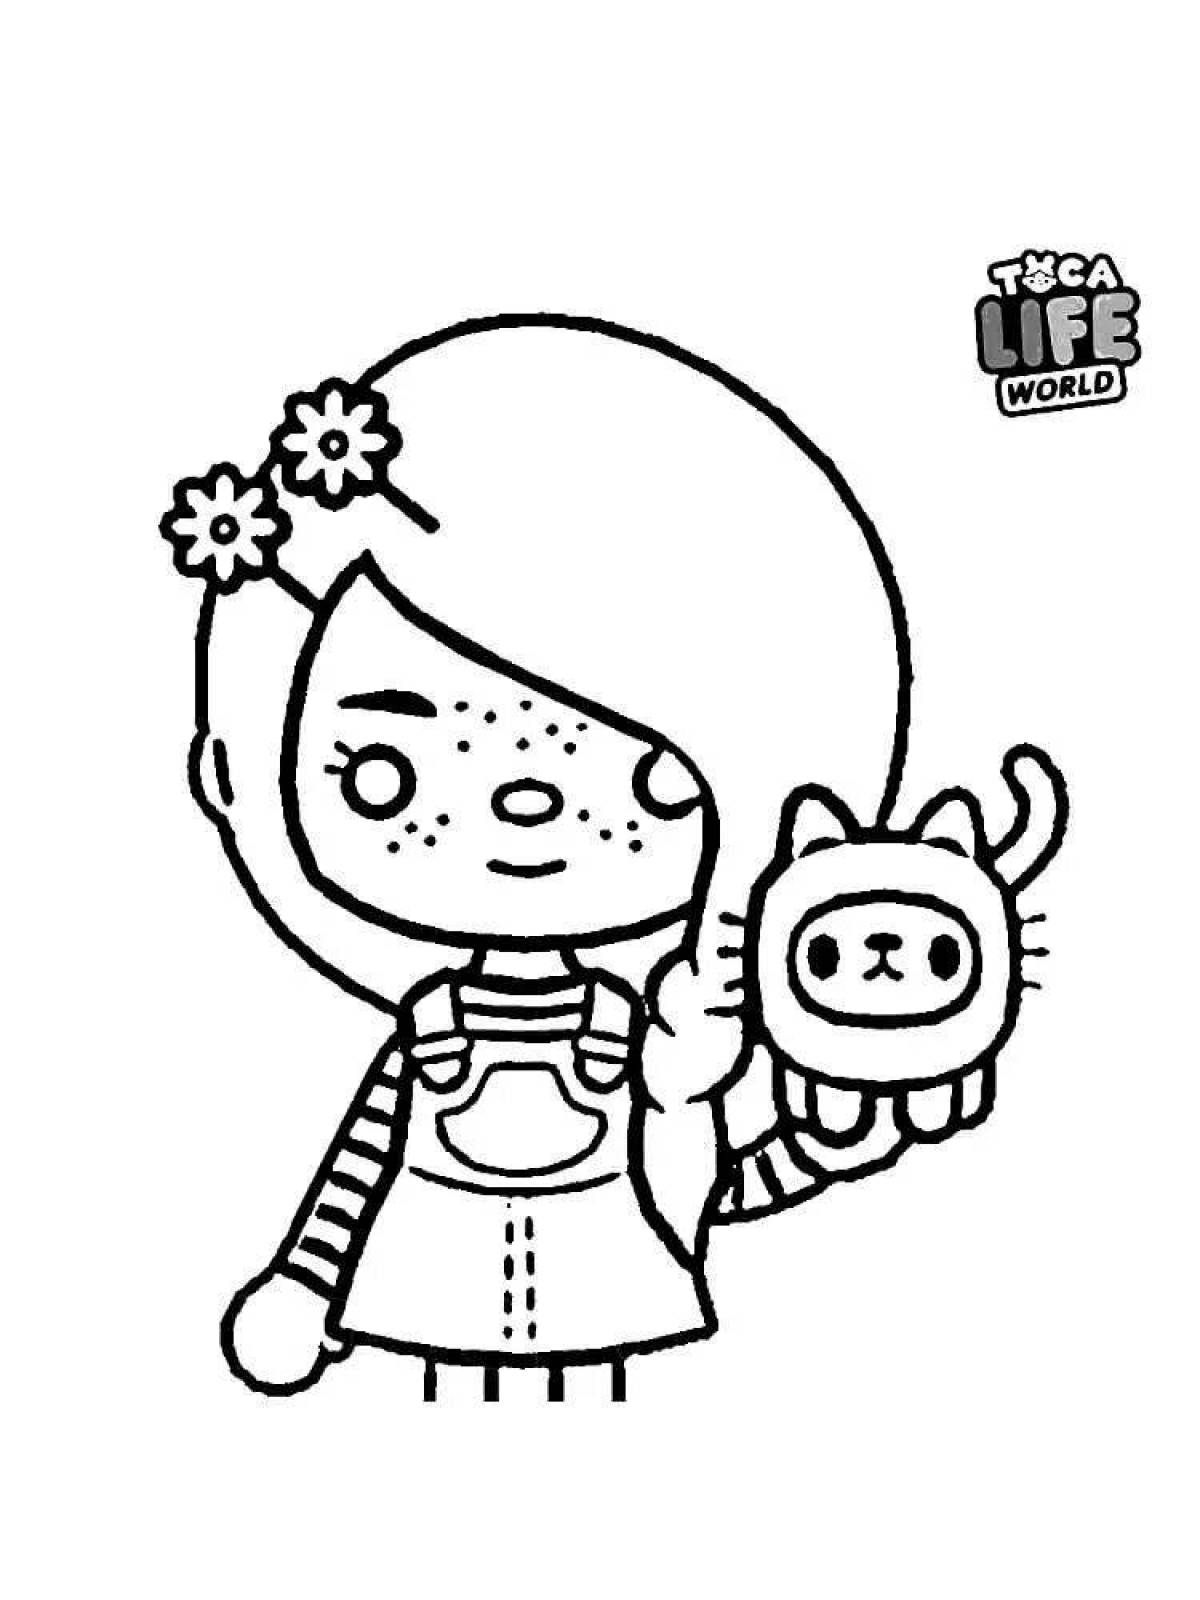 Outstanding toca world coloring page